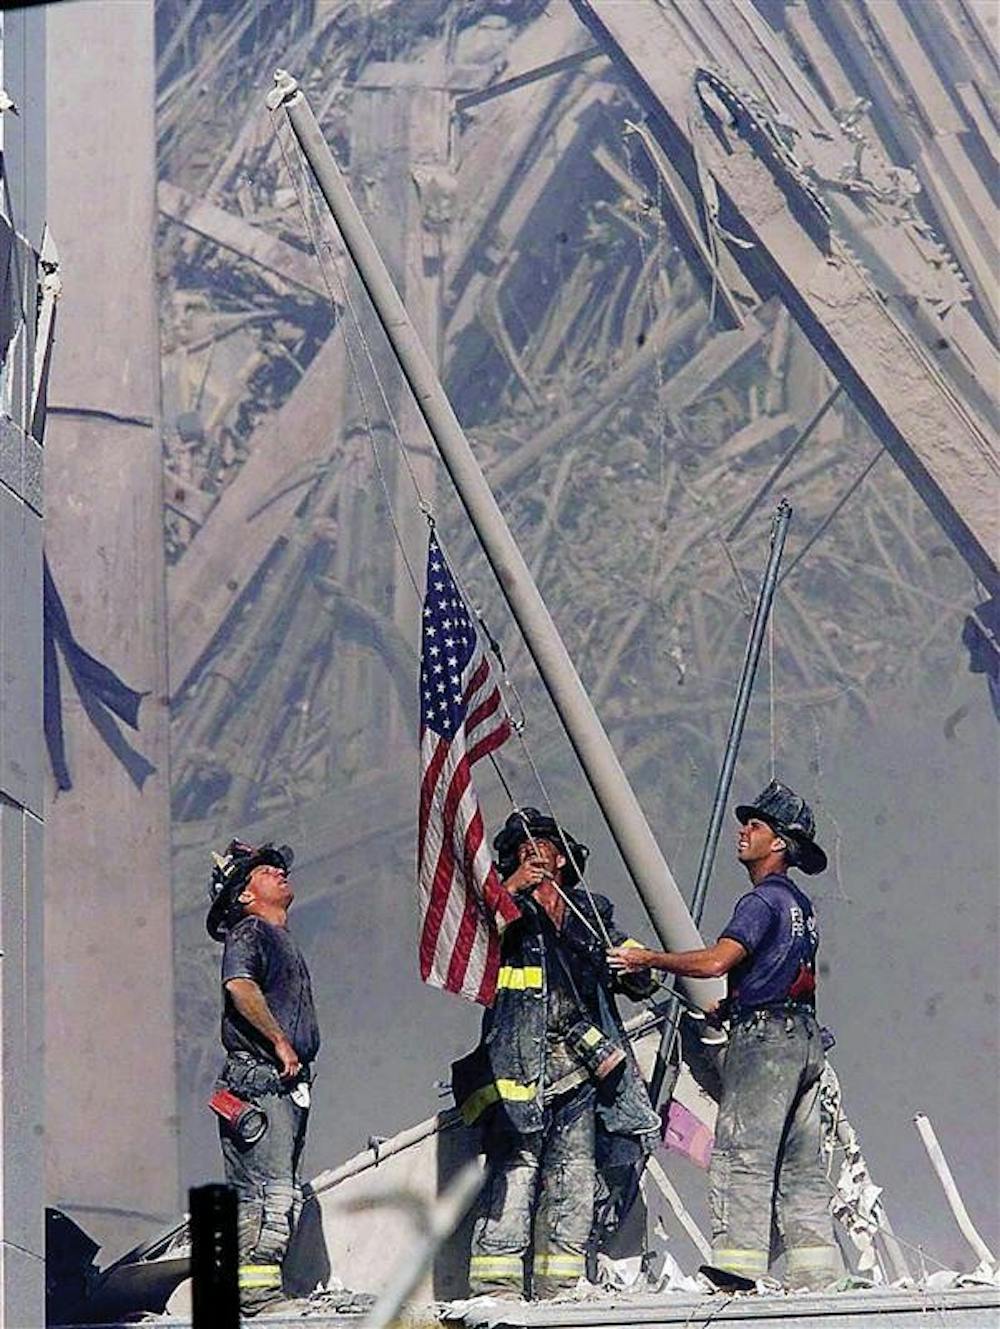 Firefighters raise a flag late in the afternoon on Tuesday, Sept. 11, 2001, in the wreckage of the World Trade Center towers in New York. In the most devastating terrorist onslaught ever waged against the United States, knife-wielding hijackers crashed two airliners into the World Trade Center toppling its twin 110-story towers.
